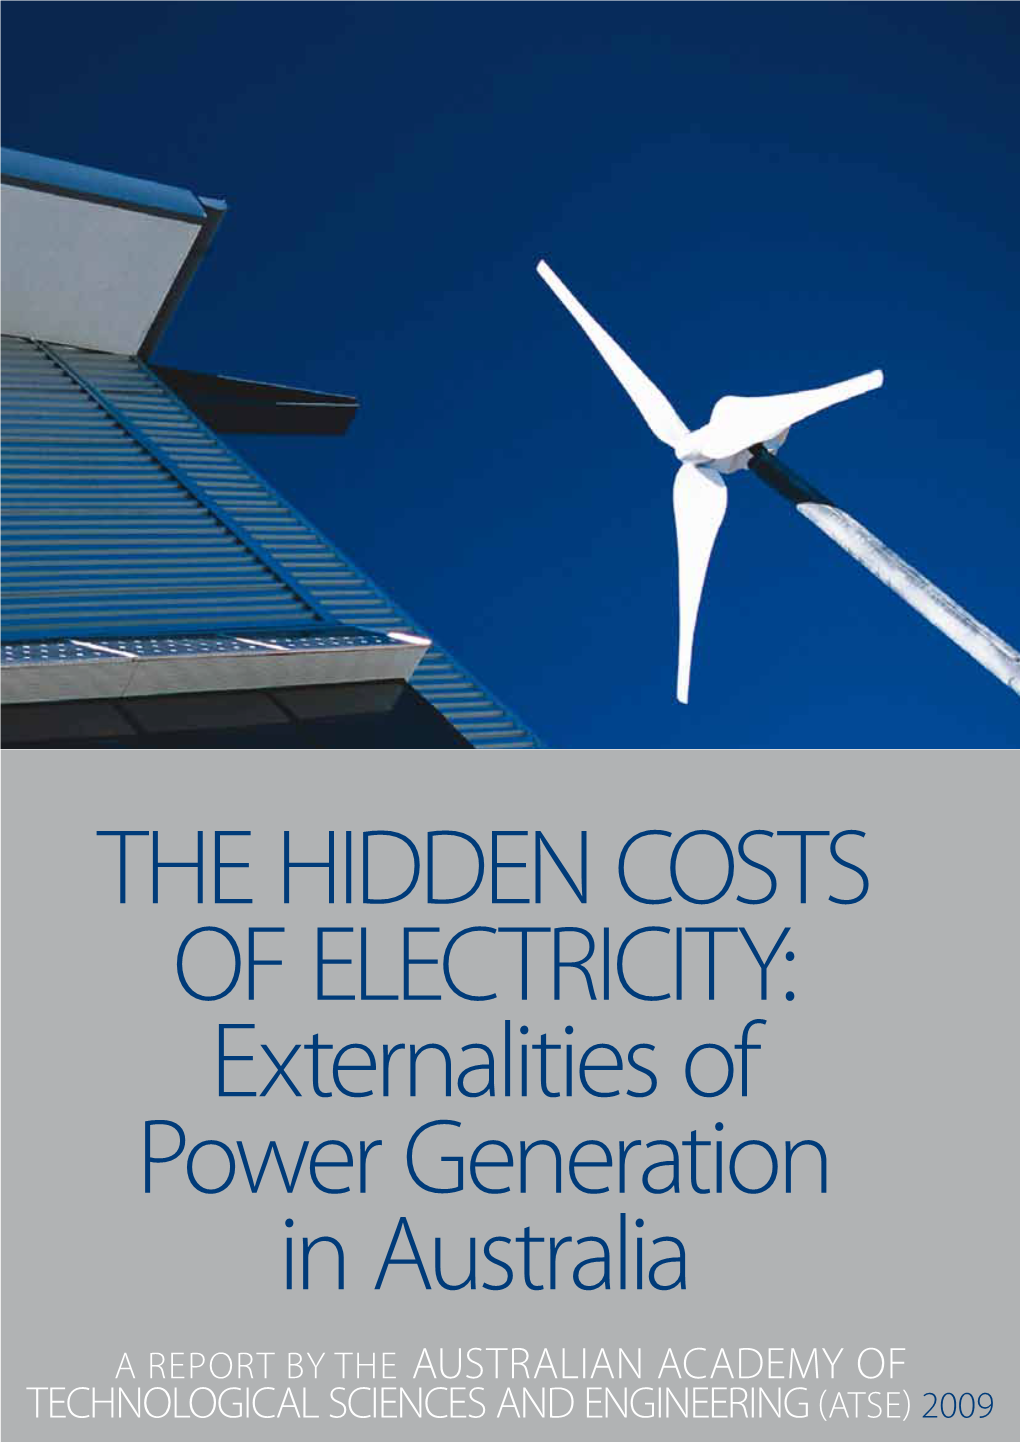 The Hidden Costs of Electricity